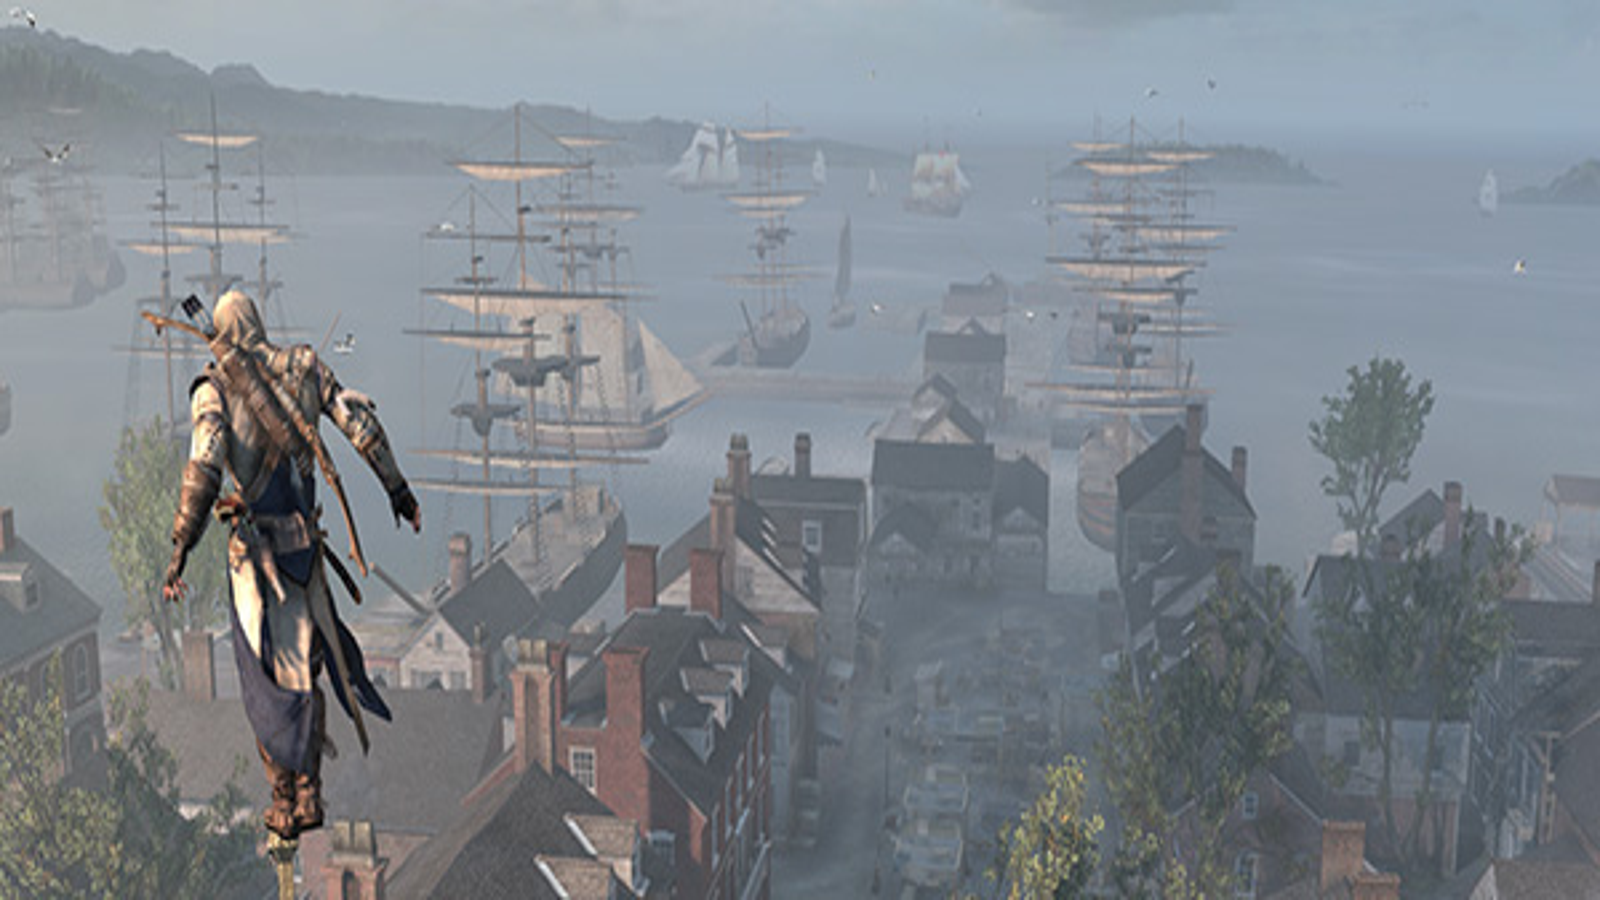 Assassin's Creed III - E3 2012: Naval Battle Gameplay 